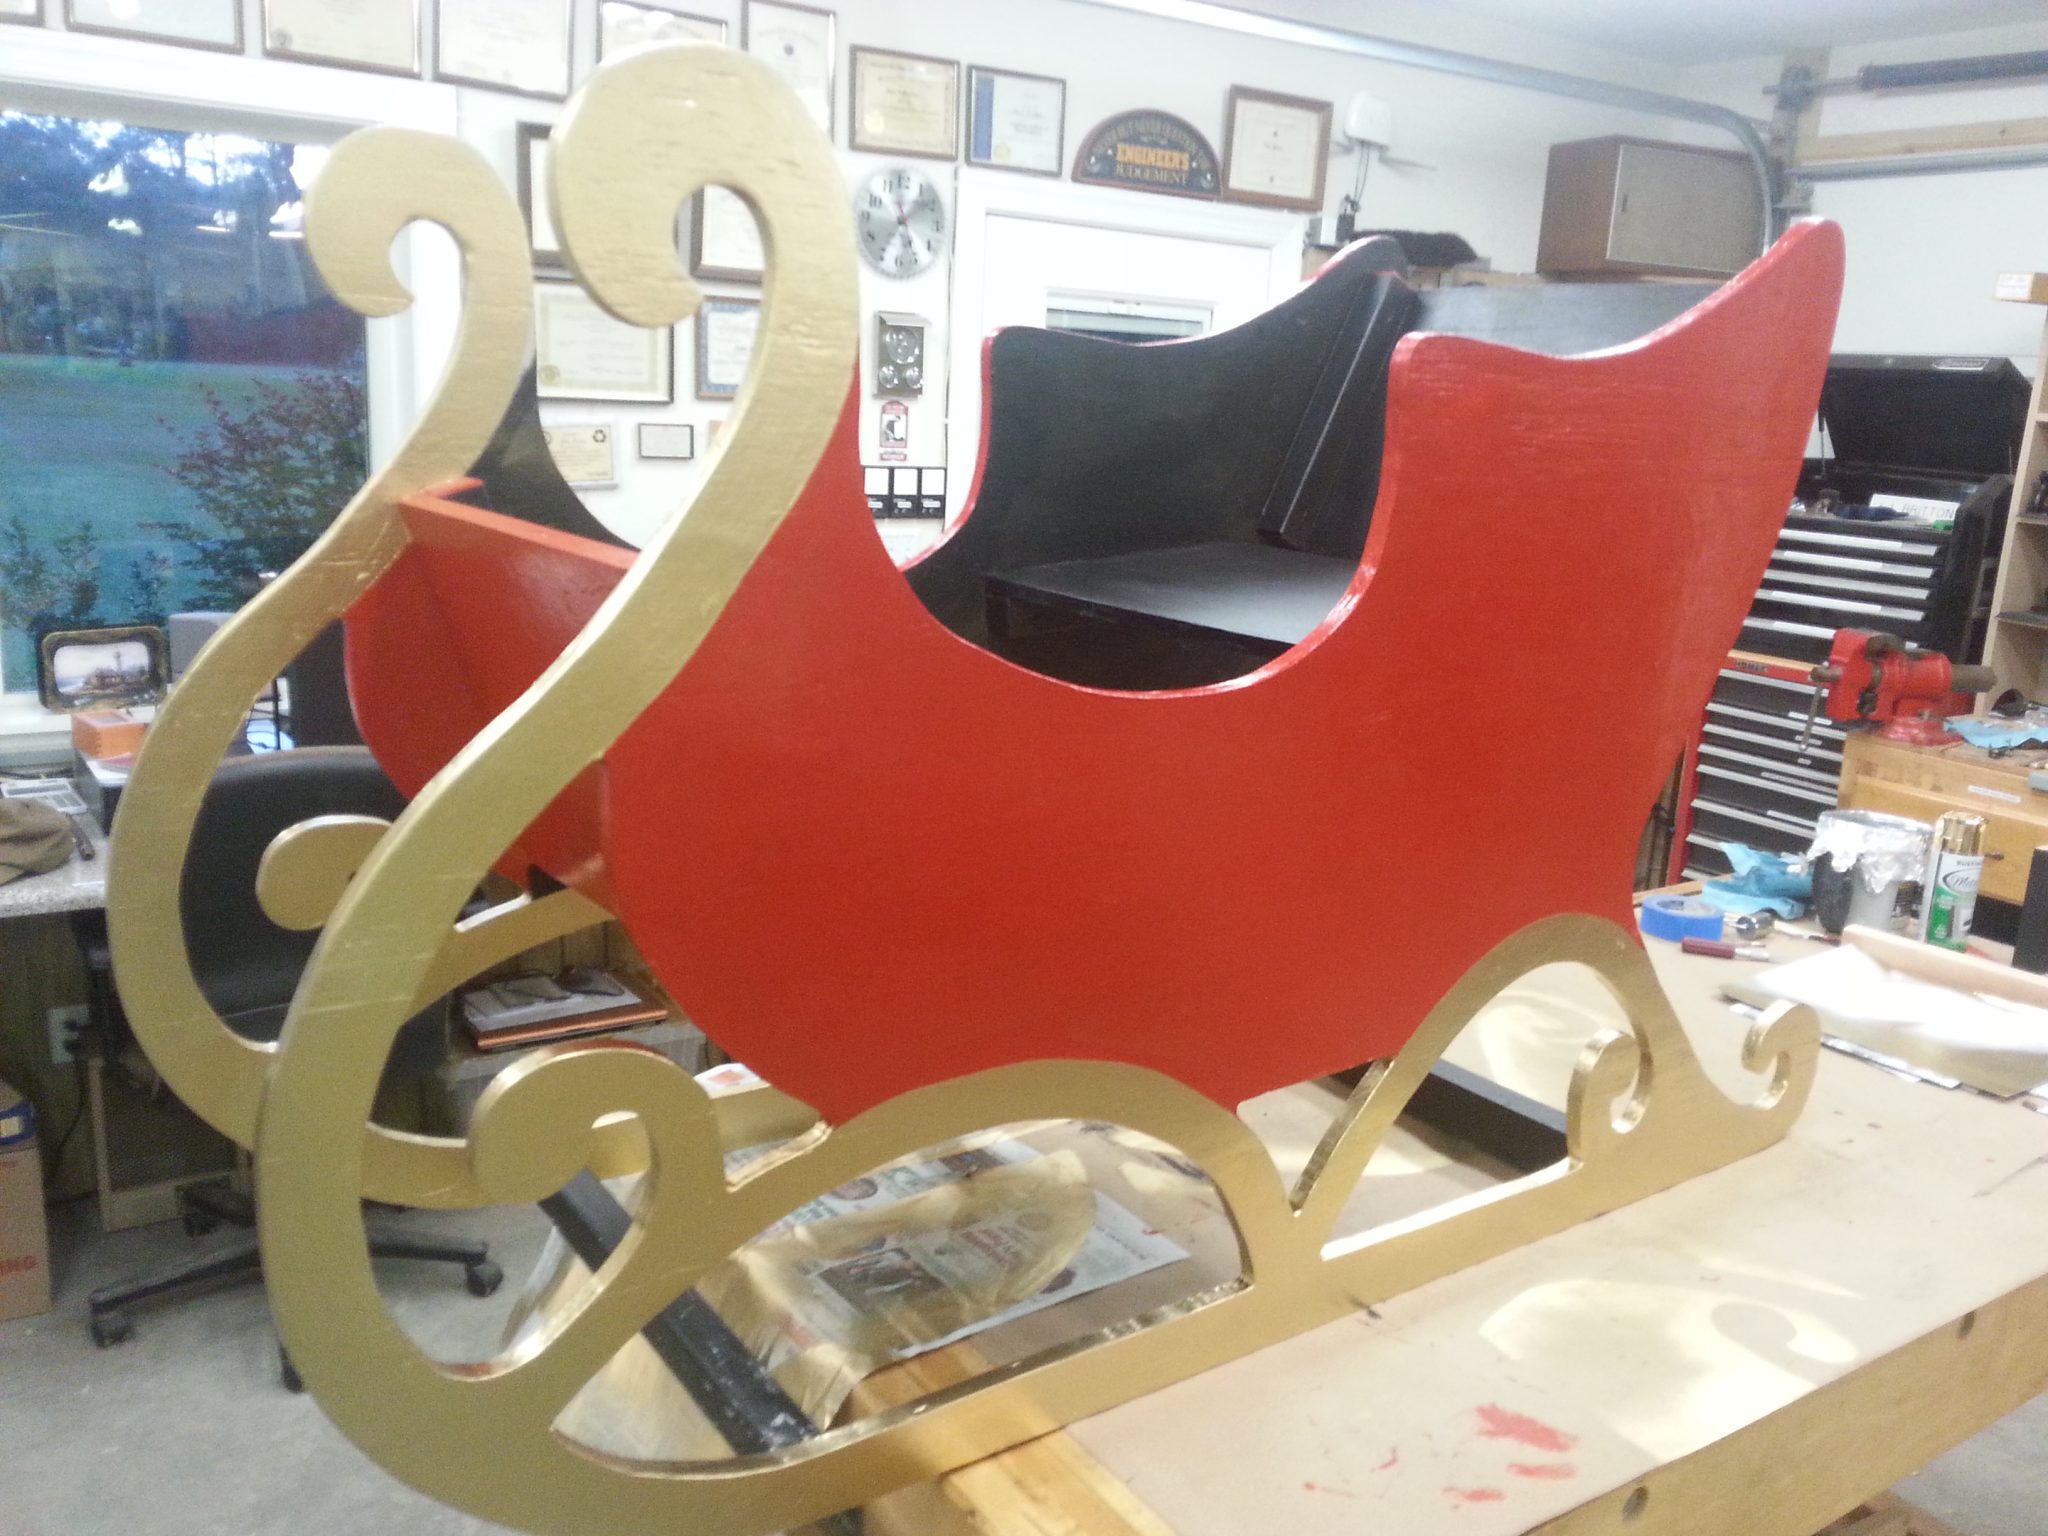 The sleigh sides were made of 1 sheet of plywood and painted. Plywood boxes were decorated by others to become Christmas gifts